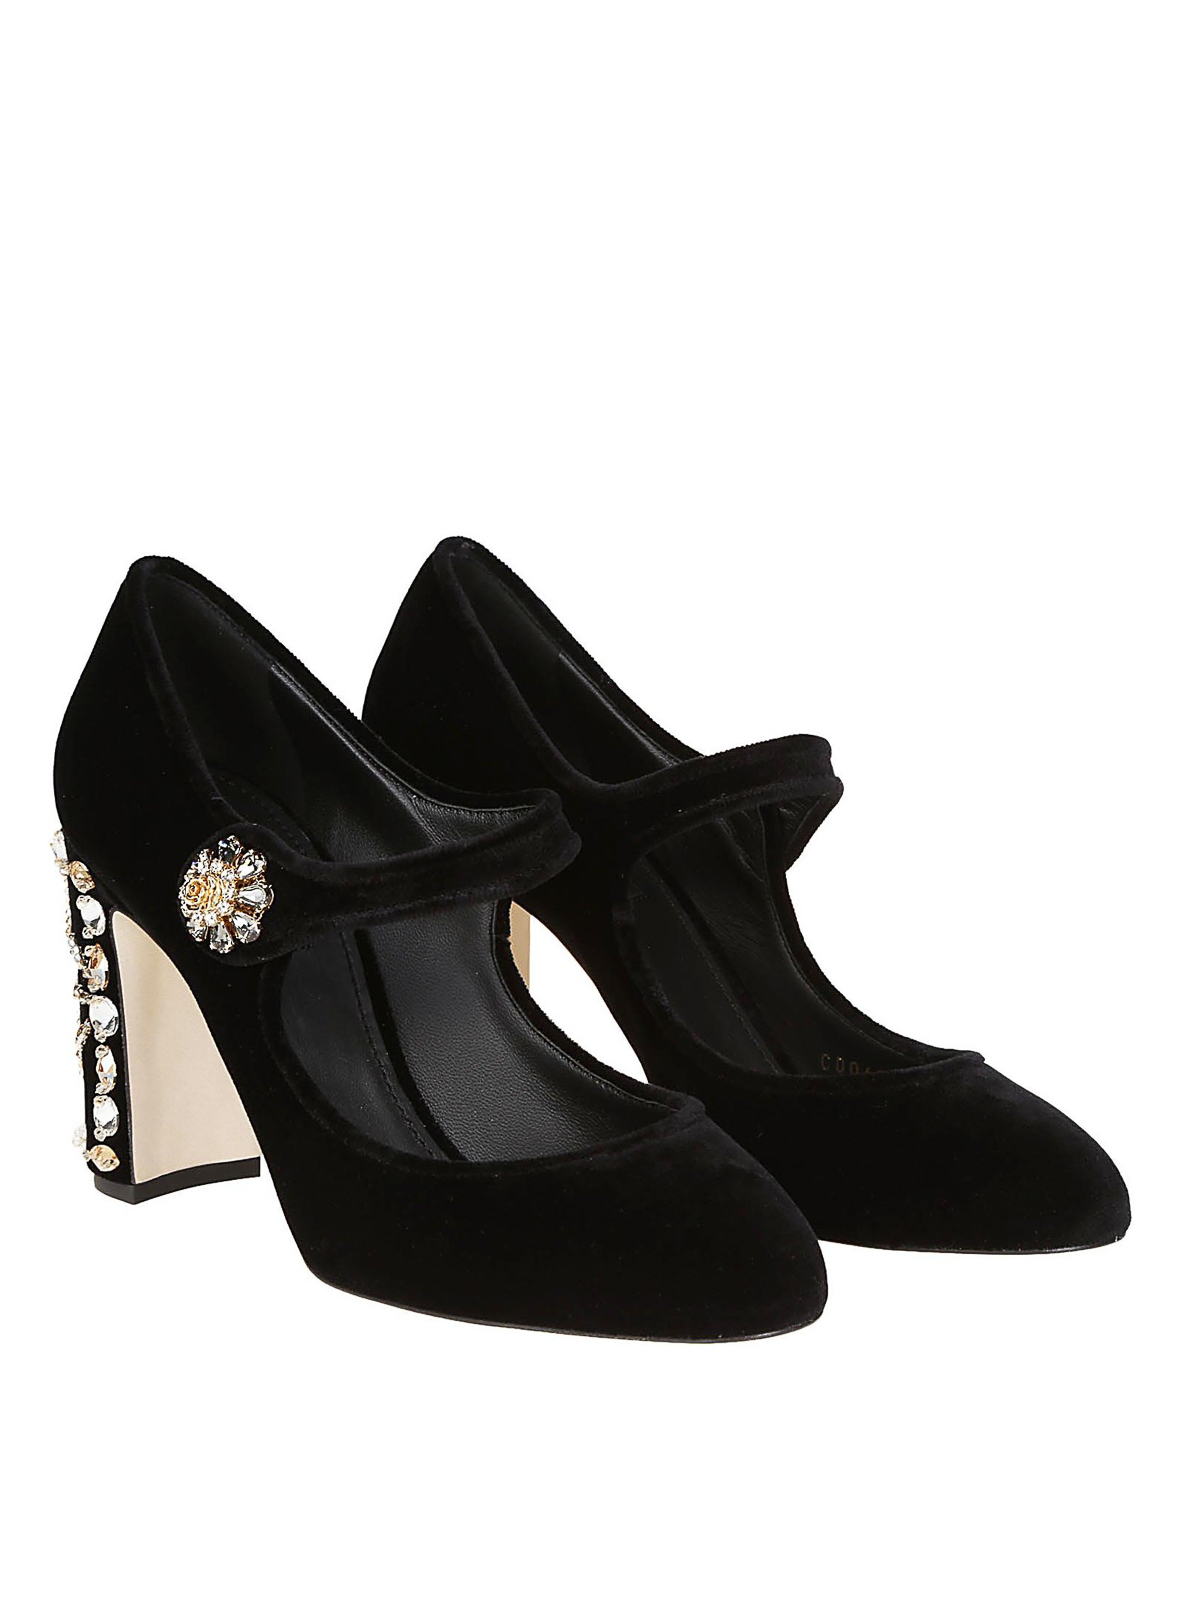 dolce and gabbana mary jane pumps